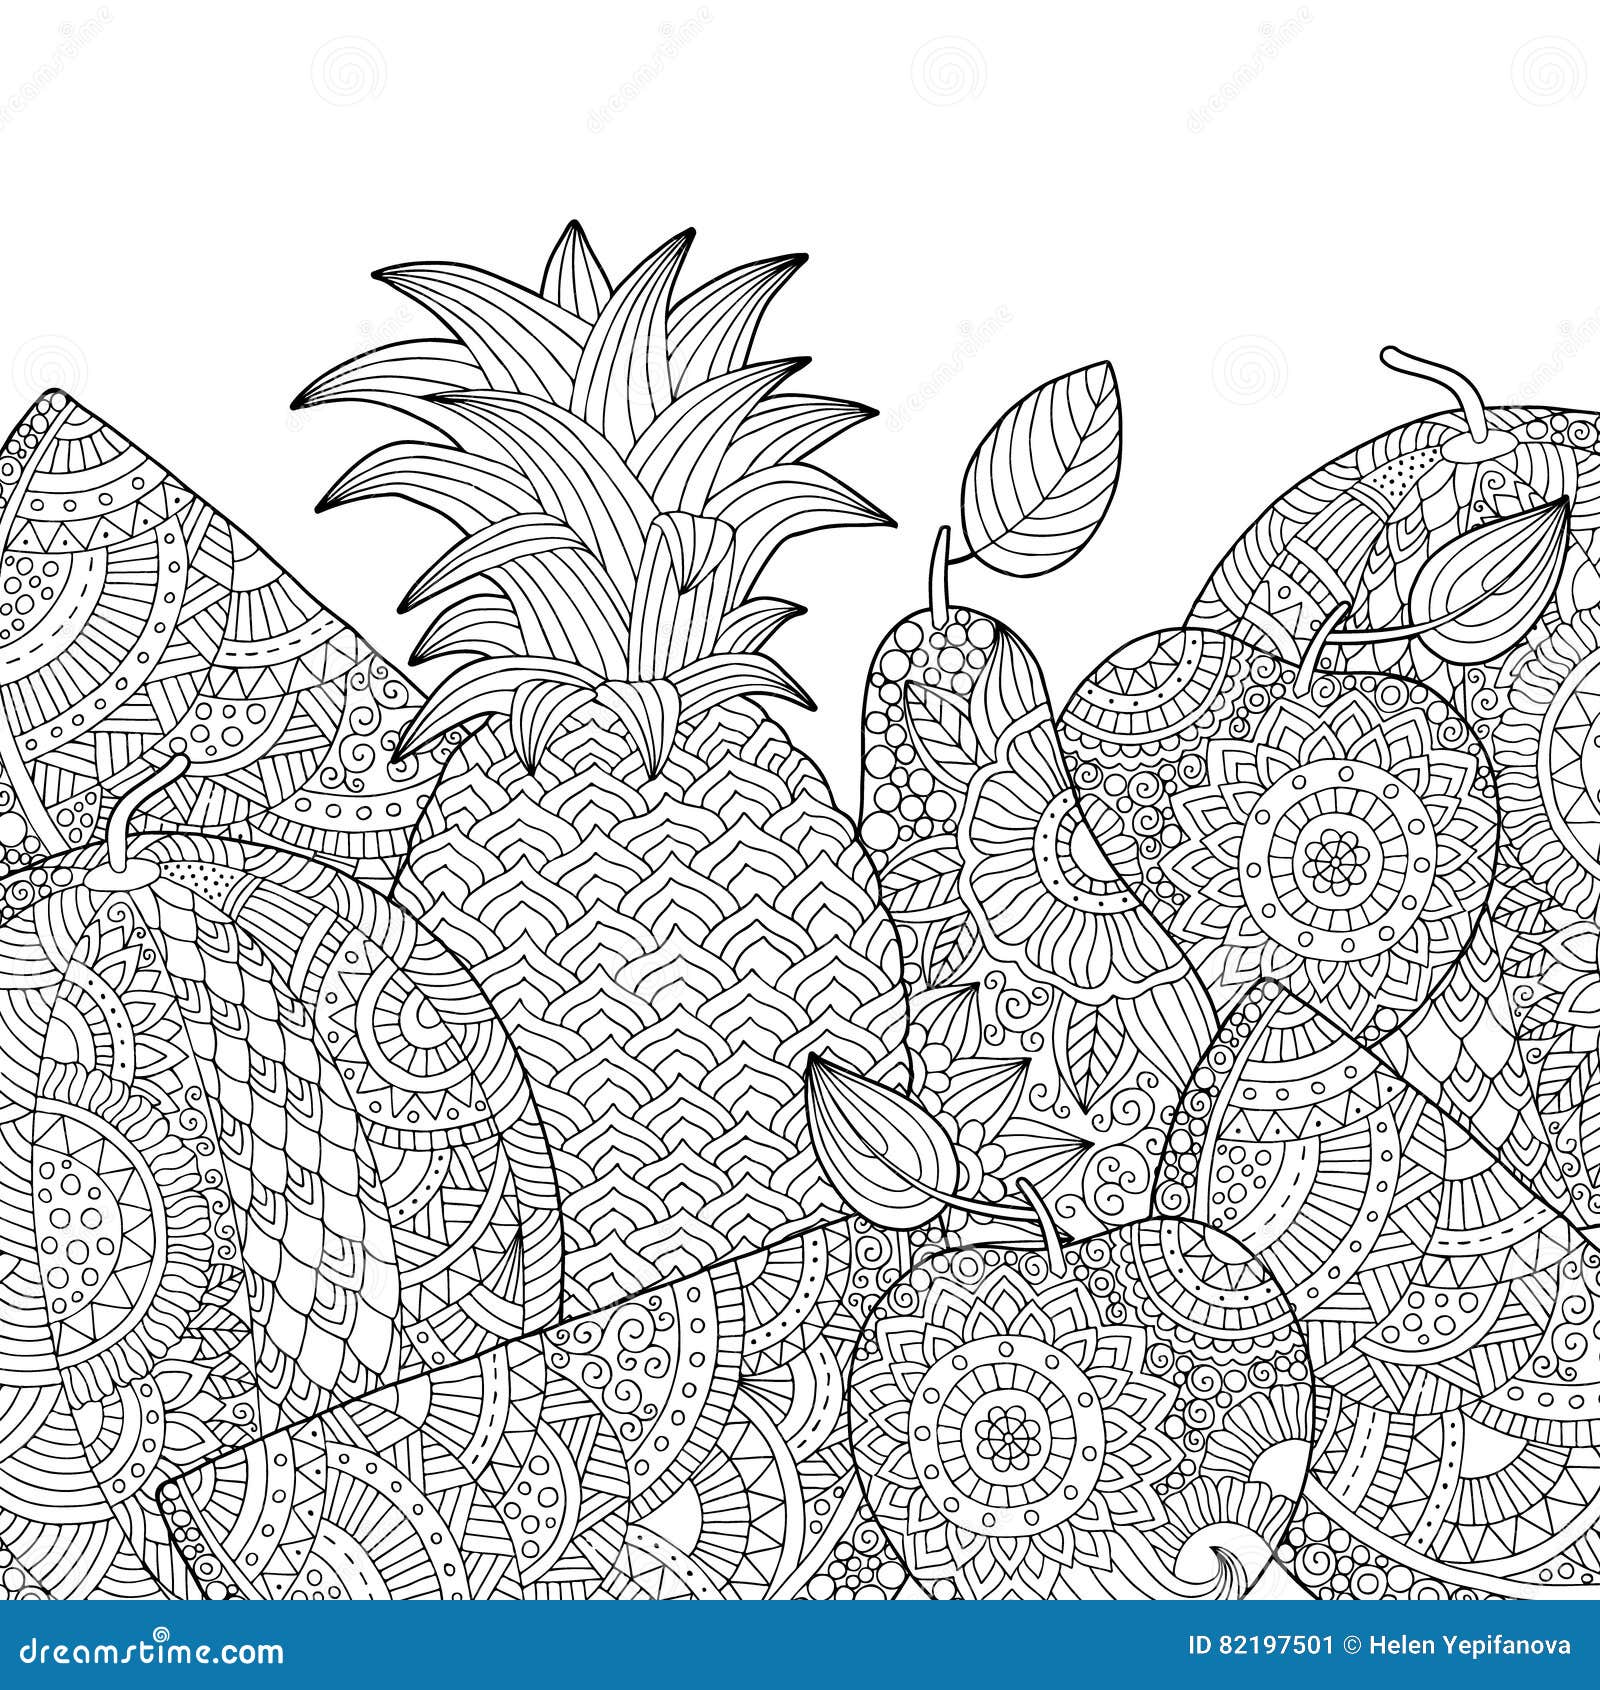 stock illustration vector hand drawn pineapple watermelon apple illustration adult coloring book freehand sketch adult anti image